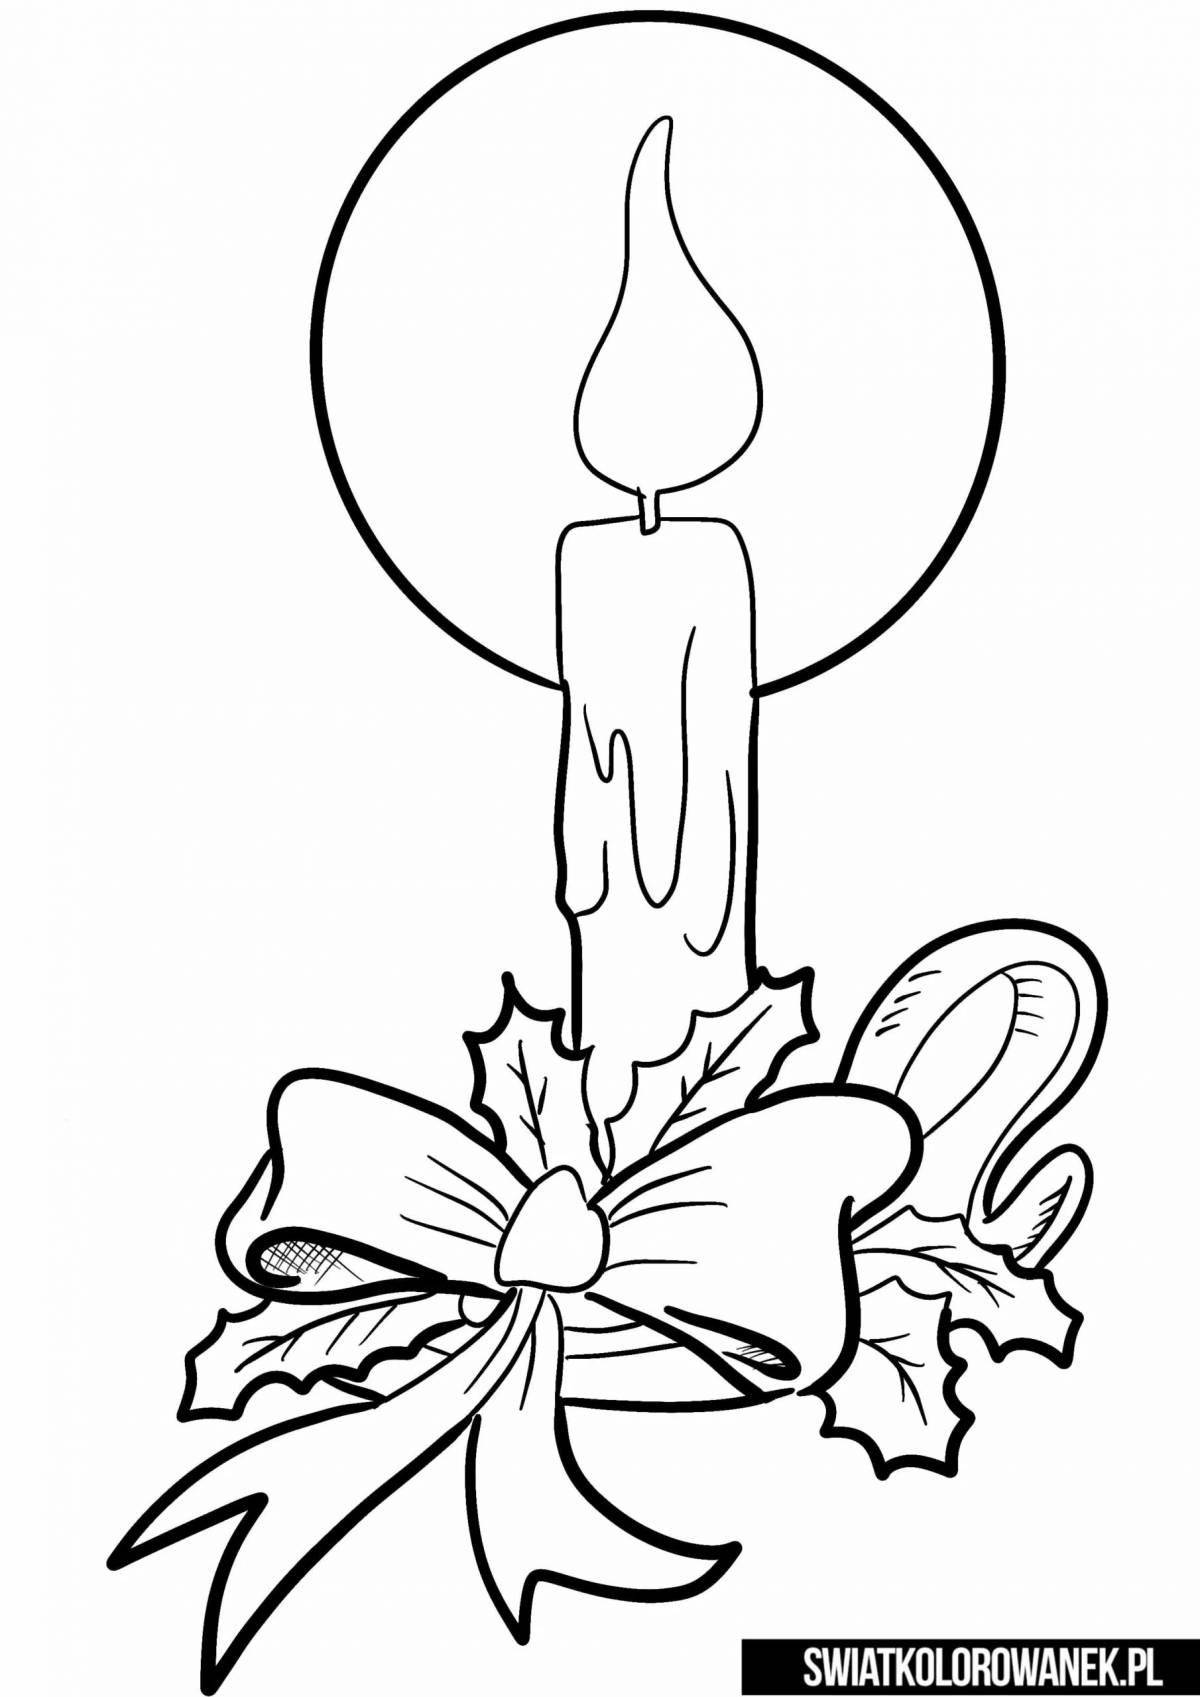 Christmas candle coloring book for kids